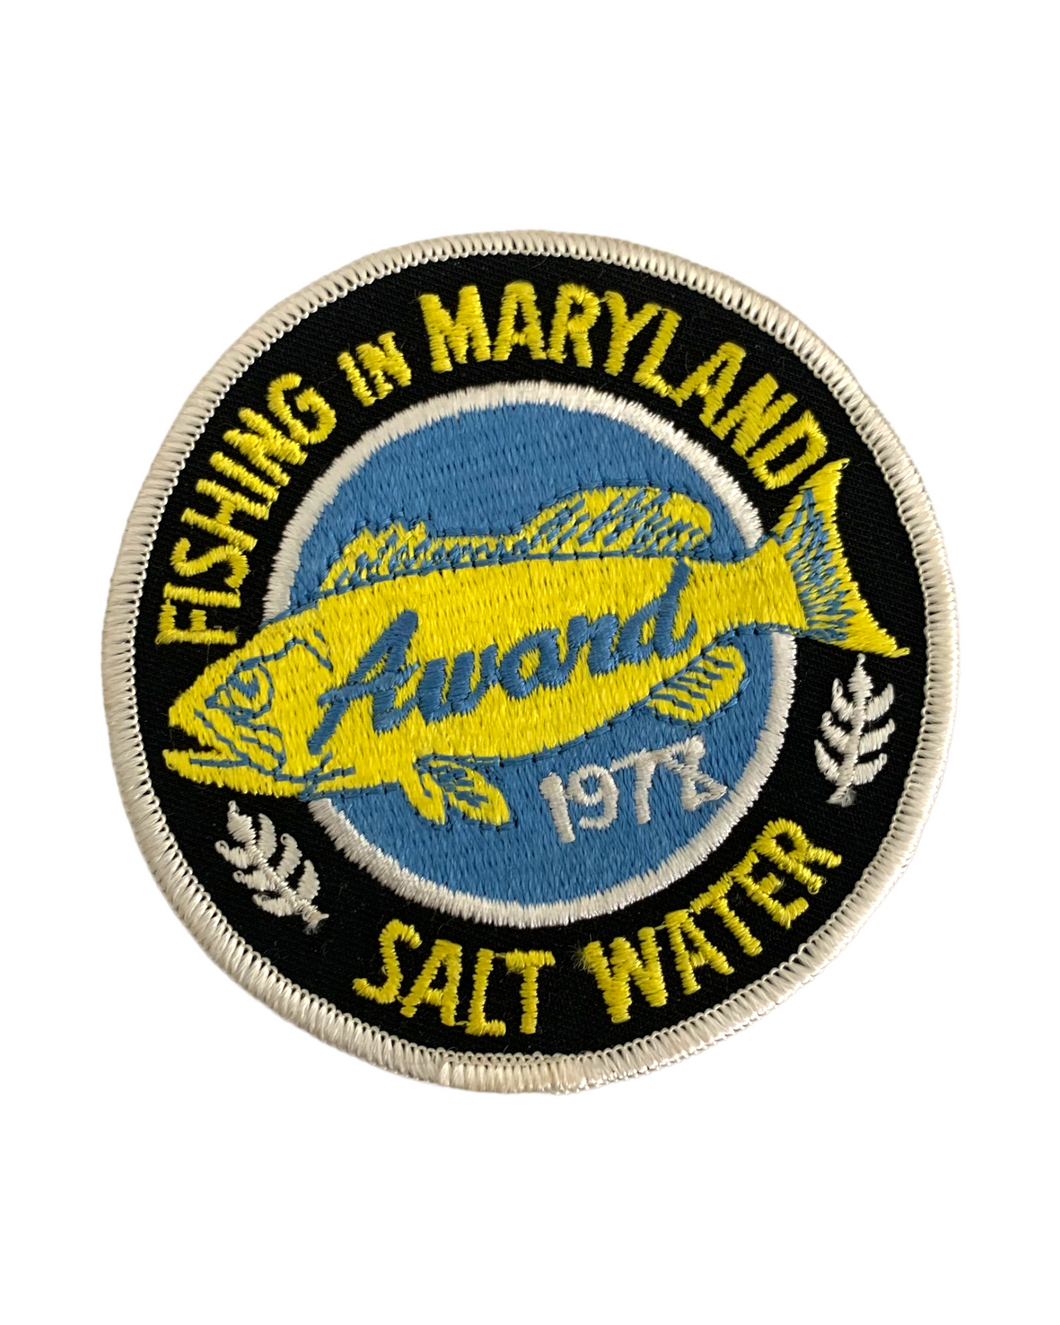 FISHING IN MARYLAND SALT WATER 1978 AWARD PATCH in Black White Yellow & Sky Blue